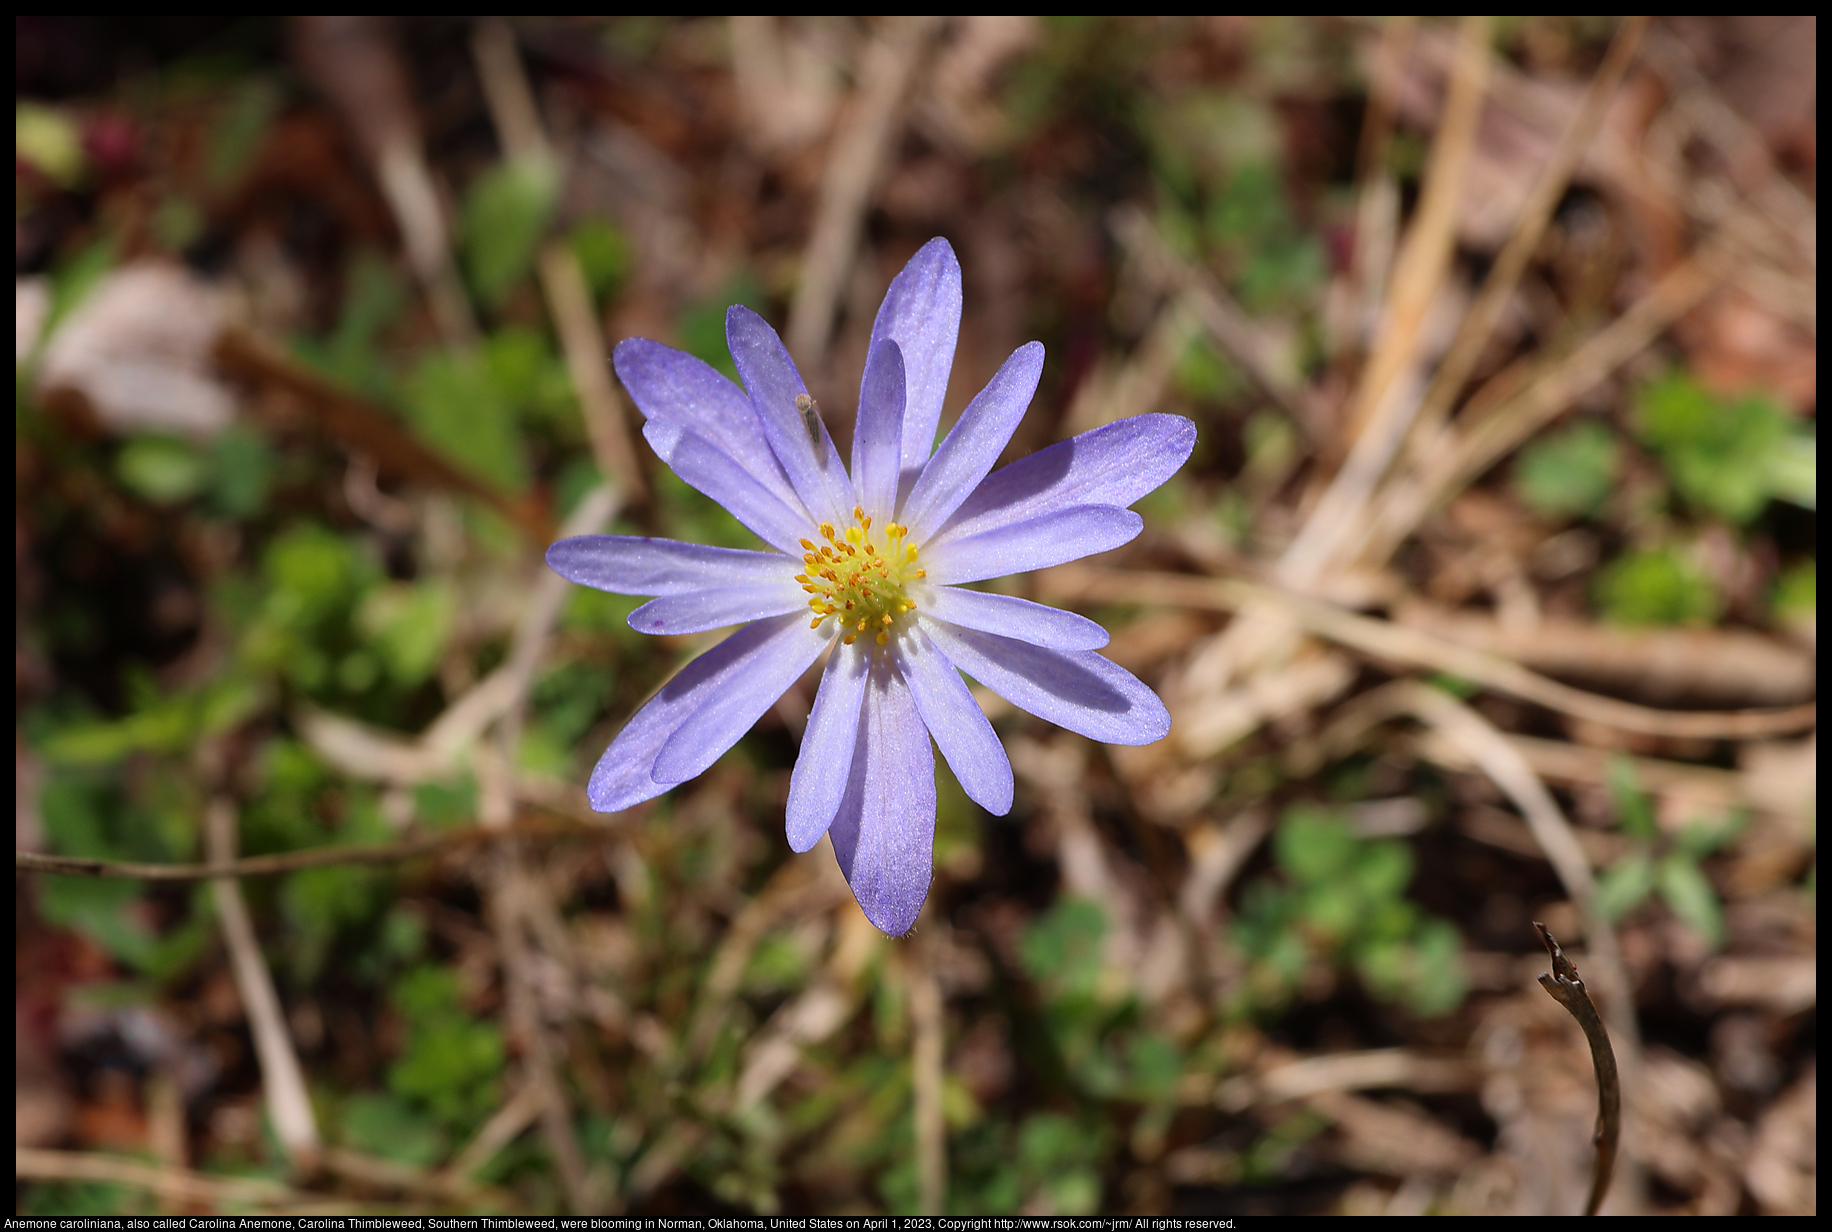 Anemone caroliniana, also called Carolina Anemone, Carolina Thimbleweed, Southern Thimbleweed, were blooming in Norman, Oklahoma, United States on April 1, 2023